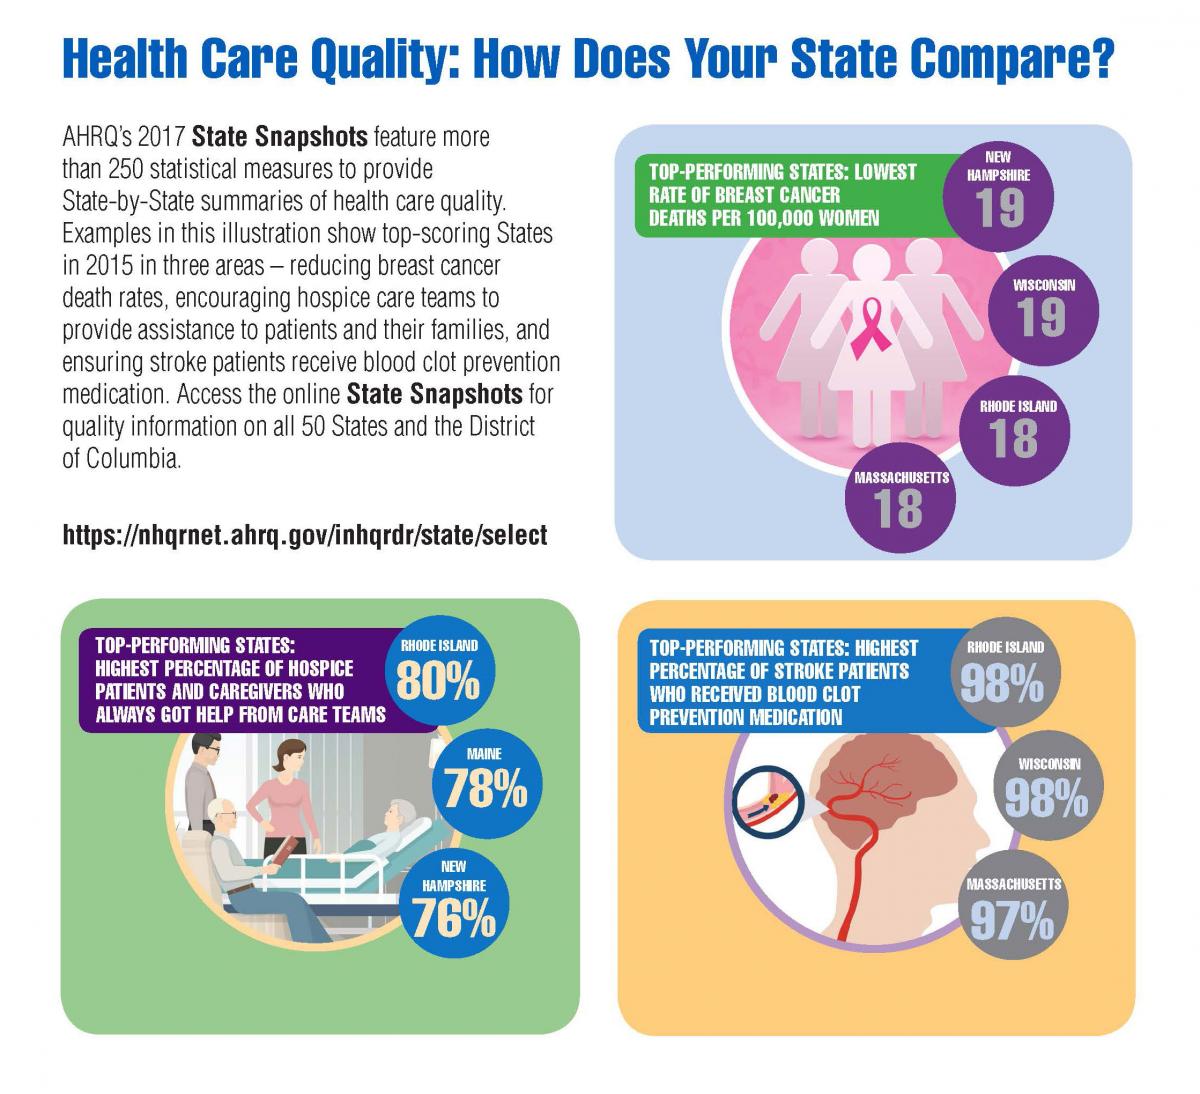 AHRQ’s 2017 State Snapshots feature more than 250 statistical measures to provide State-by-State summaries of health care quality.